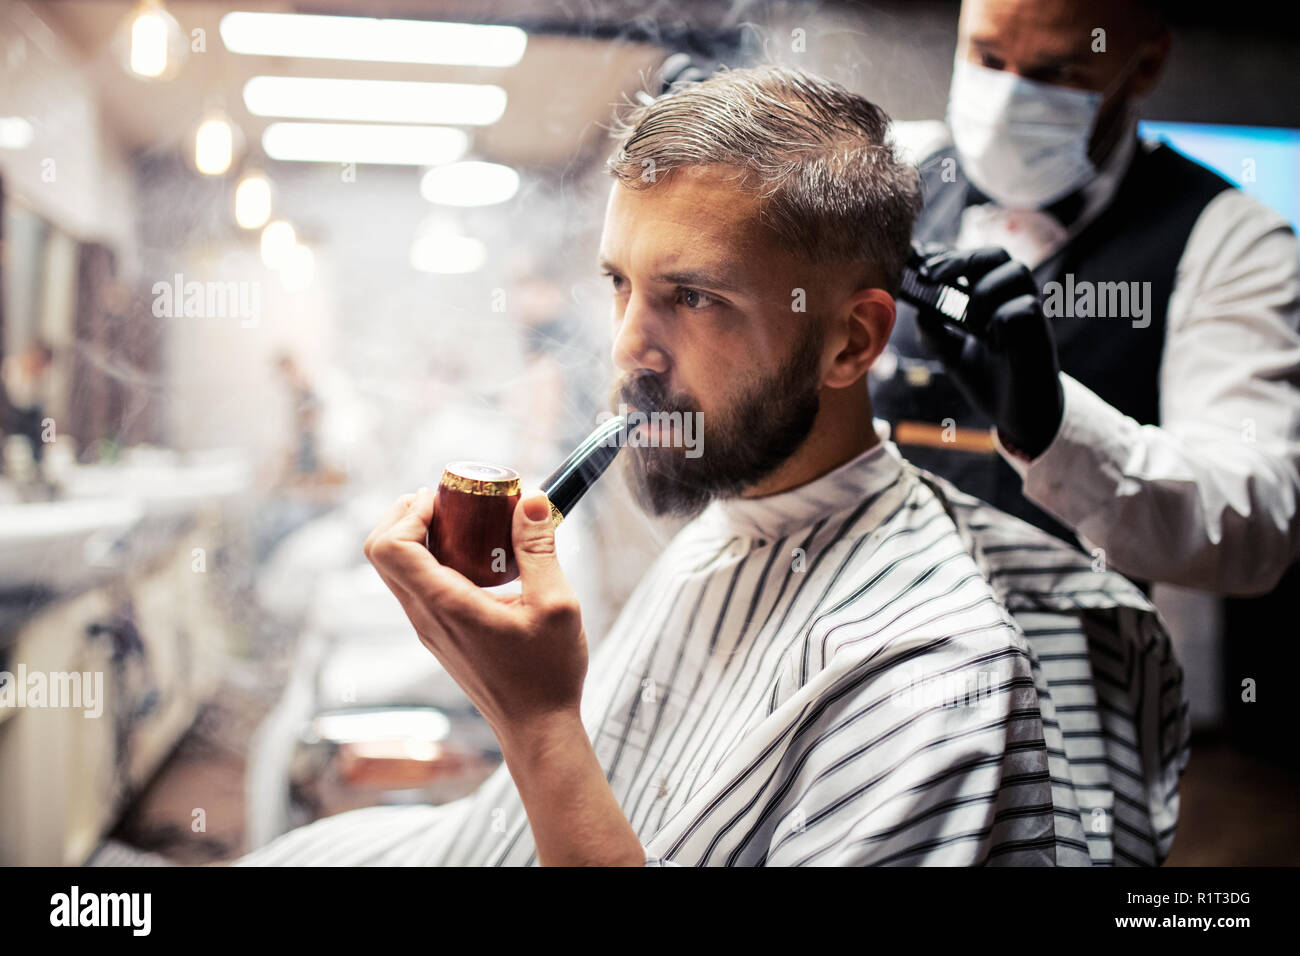 Hipster man client visiting haidresser and hairstylist in barber shop, smoking a pipe. Stock Photo